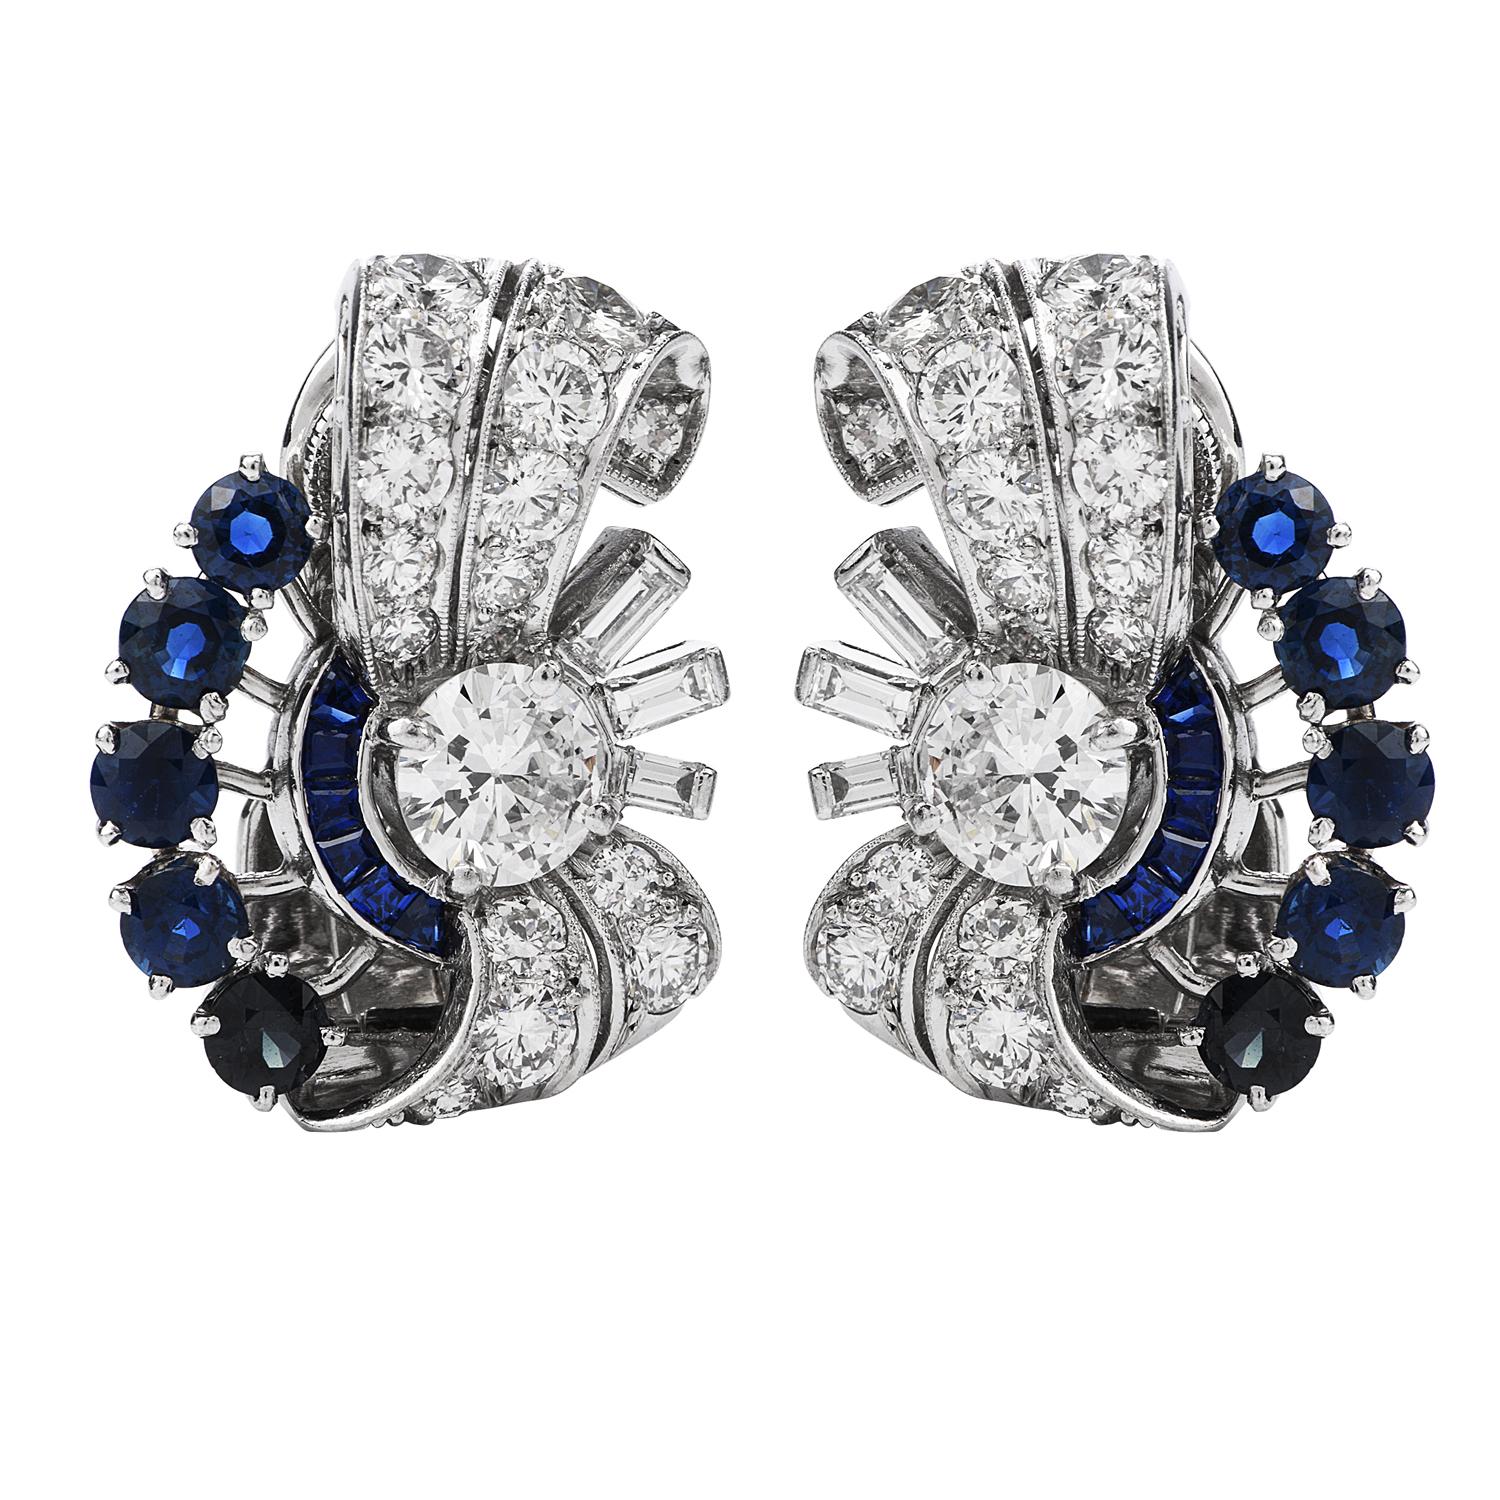 Vintage retro design floral & ribbon clip-on earrings are shining bright.

These Ramond Yard earring Crafted in Solid Platinum, there are 2 round-cut center Diamonds weighing approximately 1.70 carats ( G-H color and VS clarity. 
There are 18